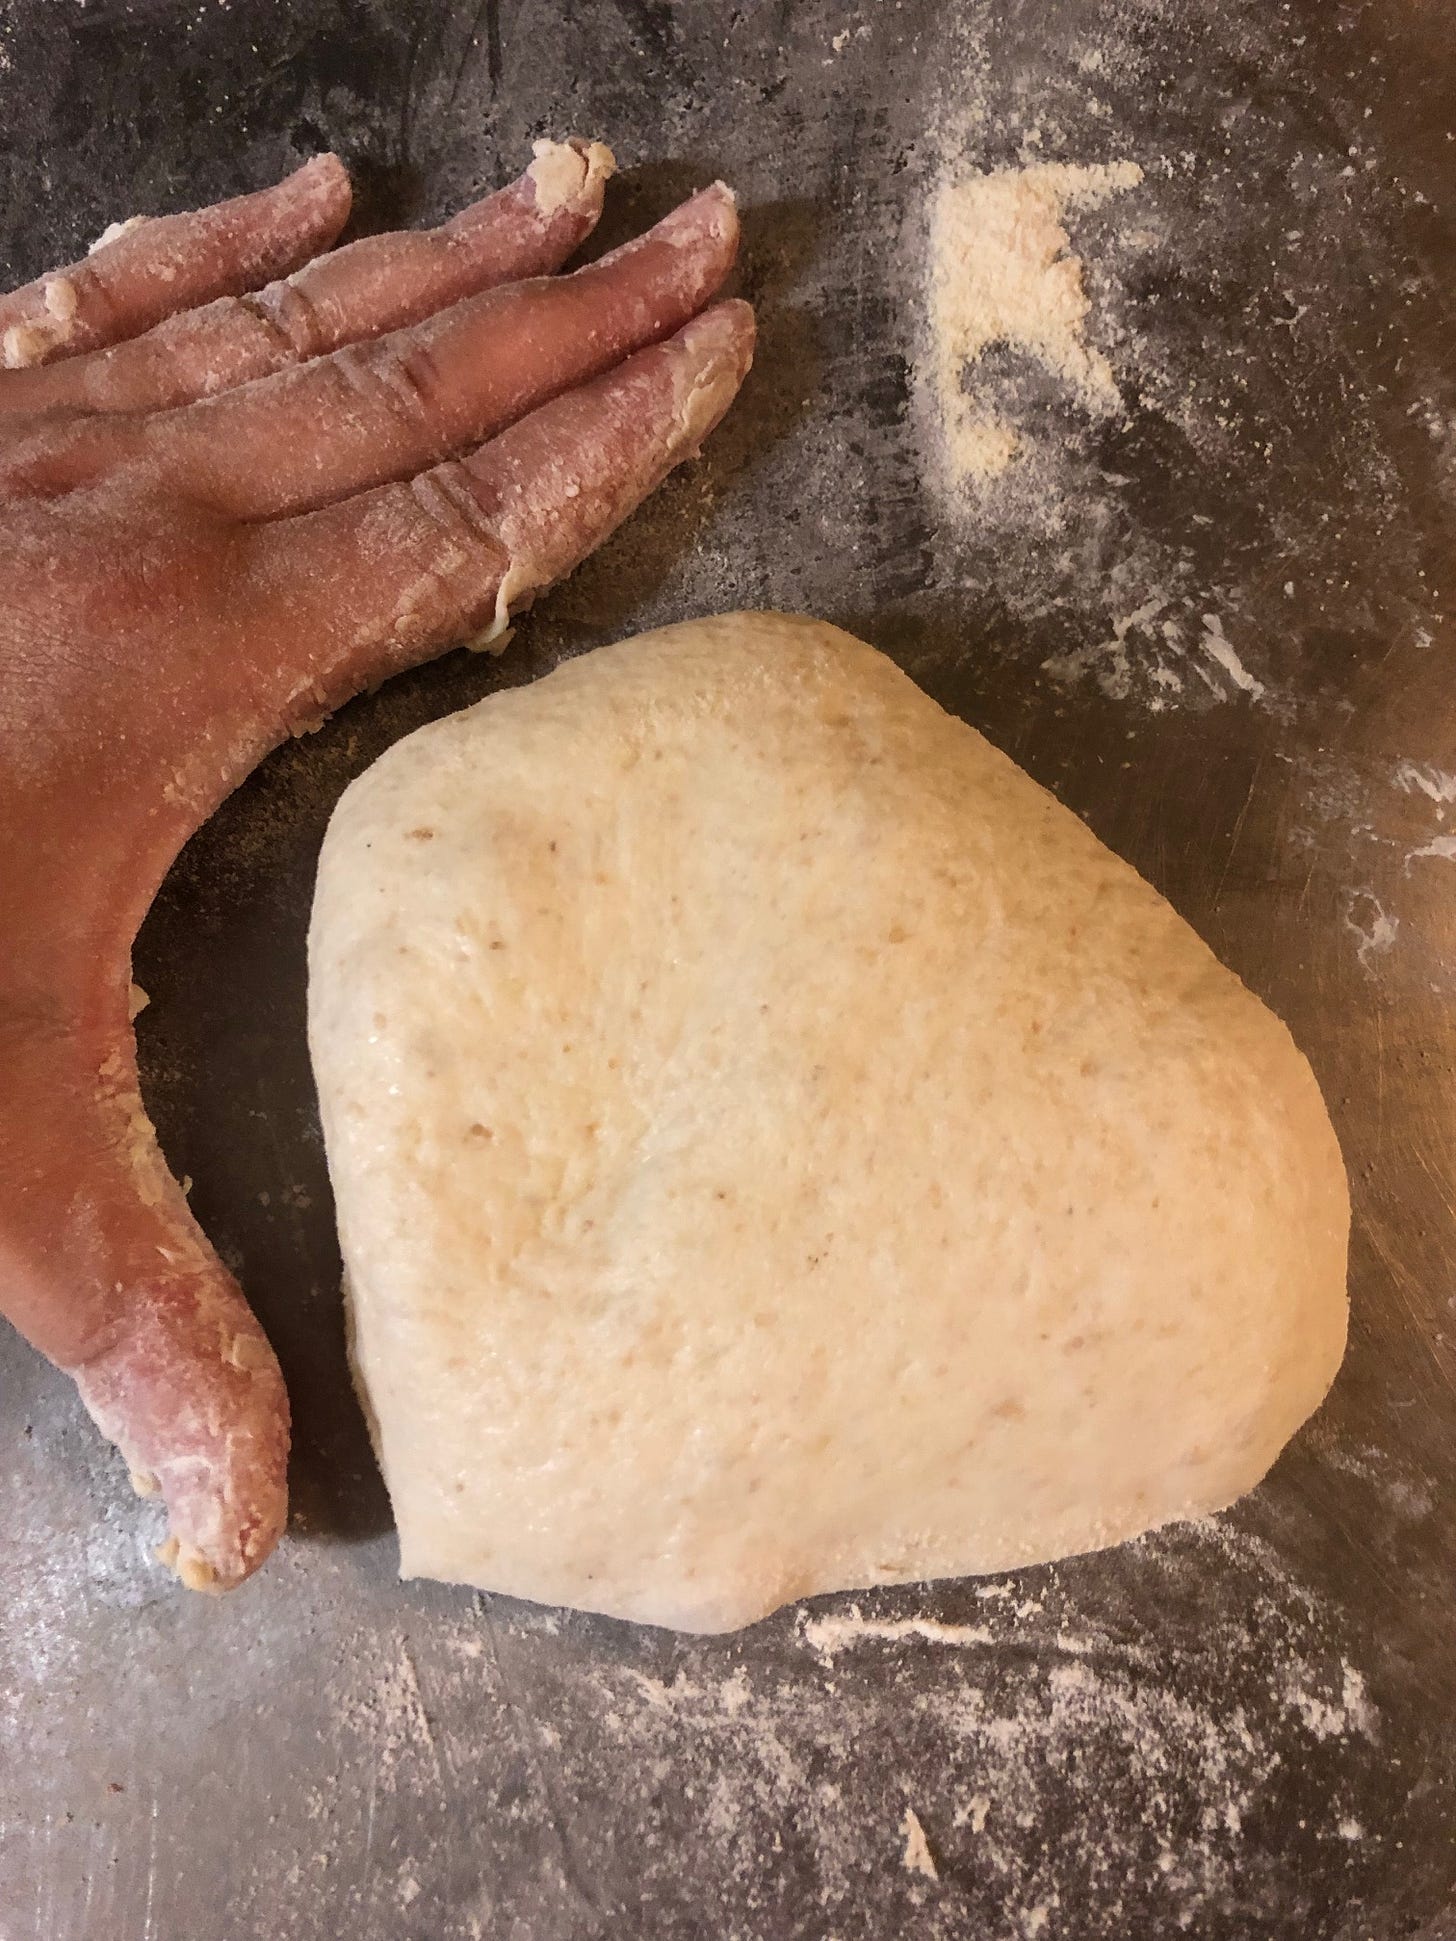 Left hand, palm down, on a metal table, next to a piece of raw unshaped dough.